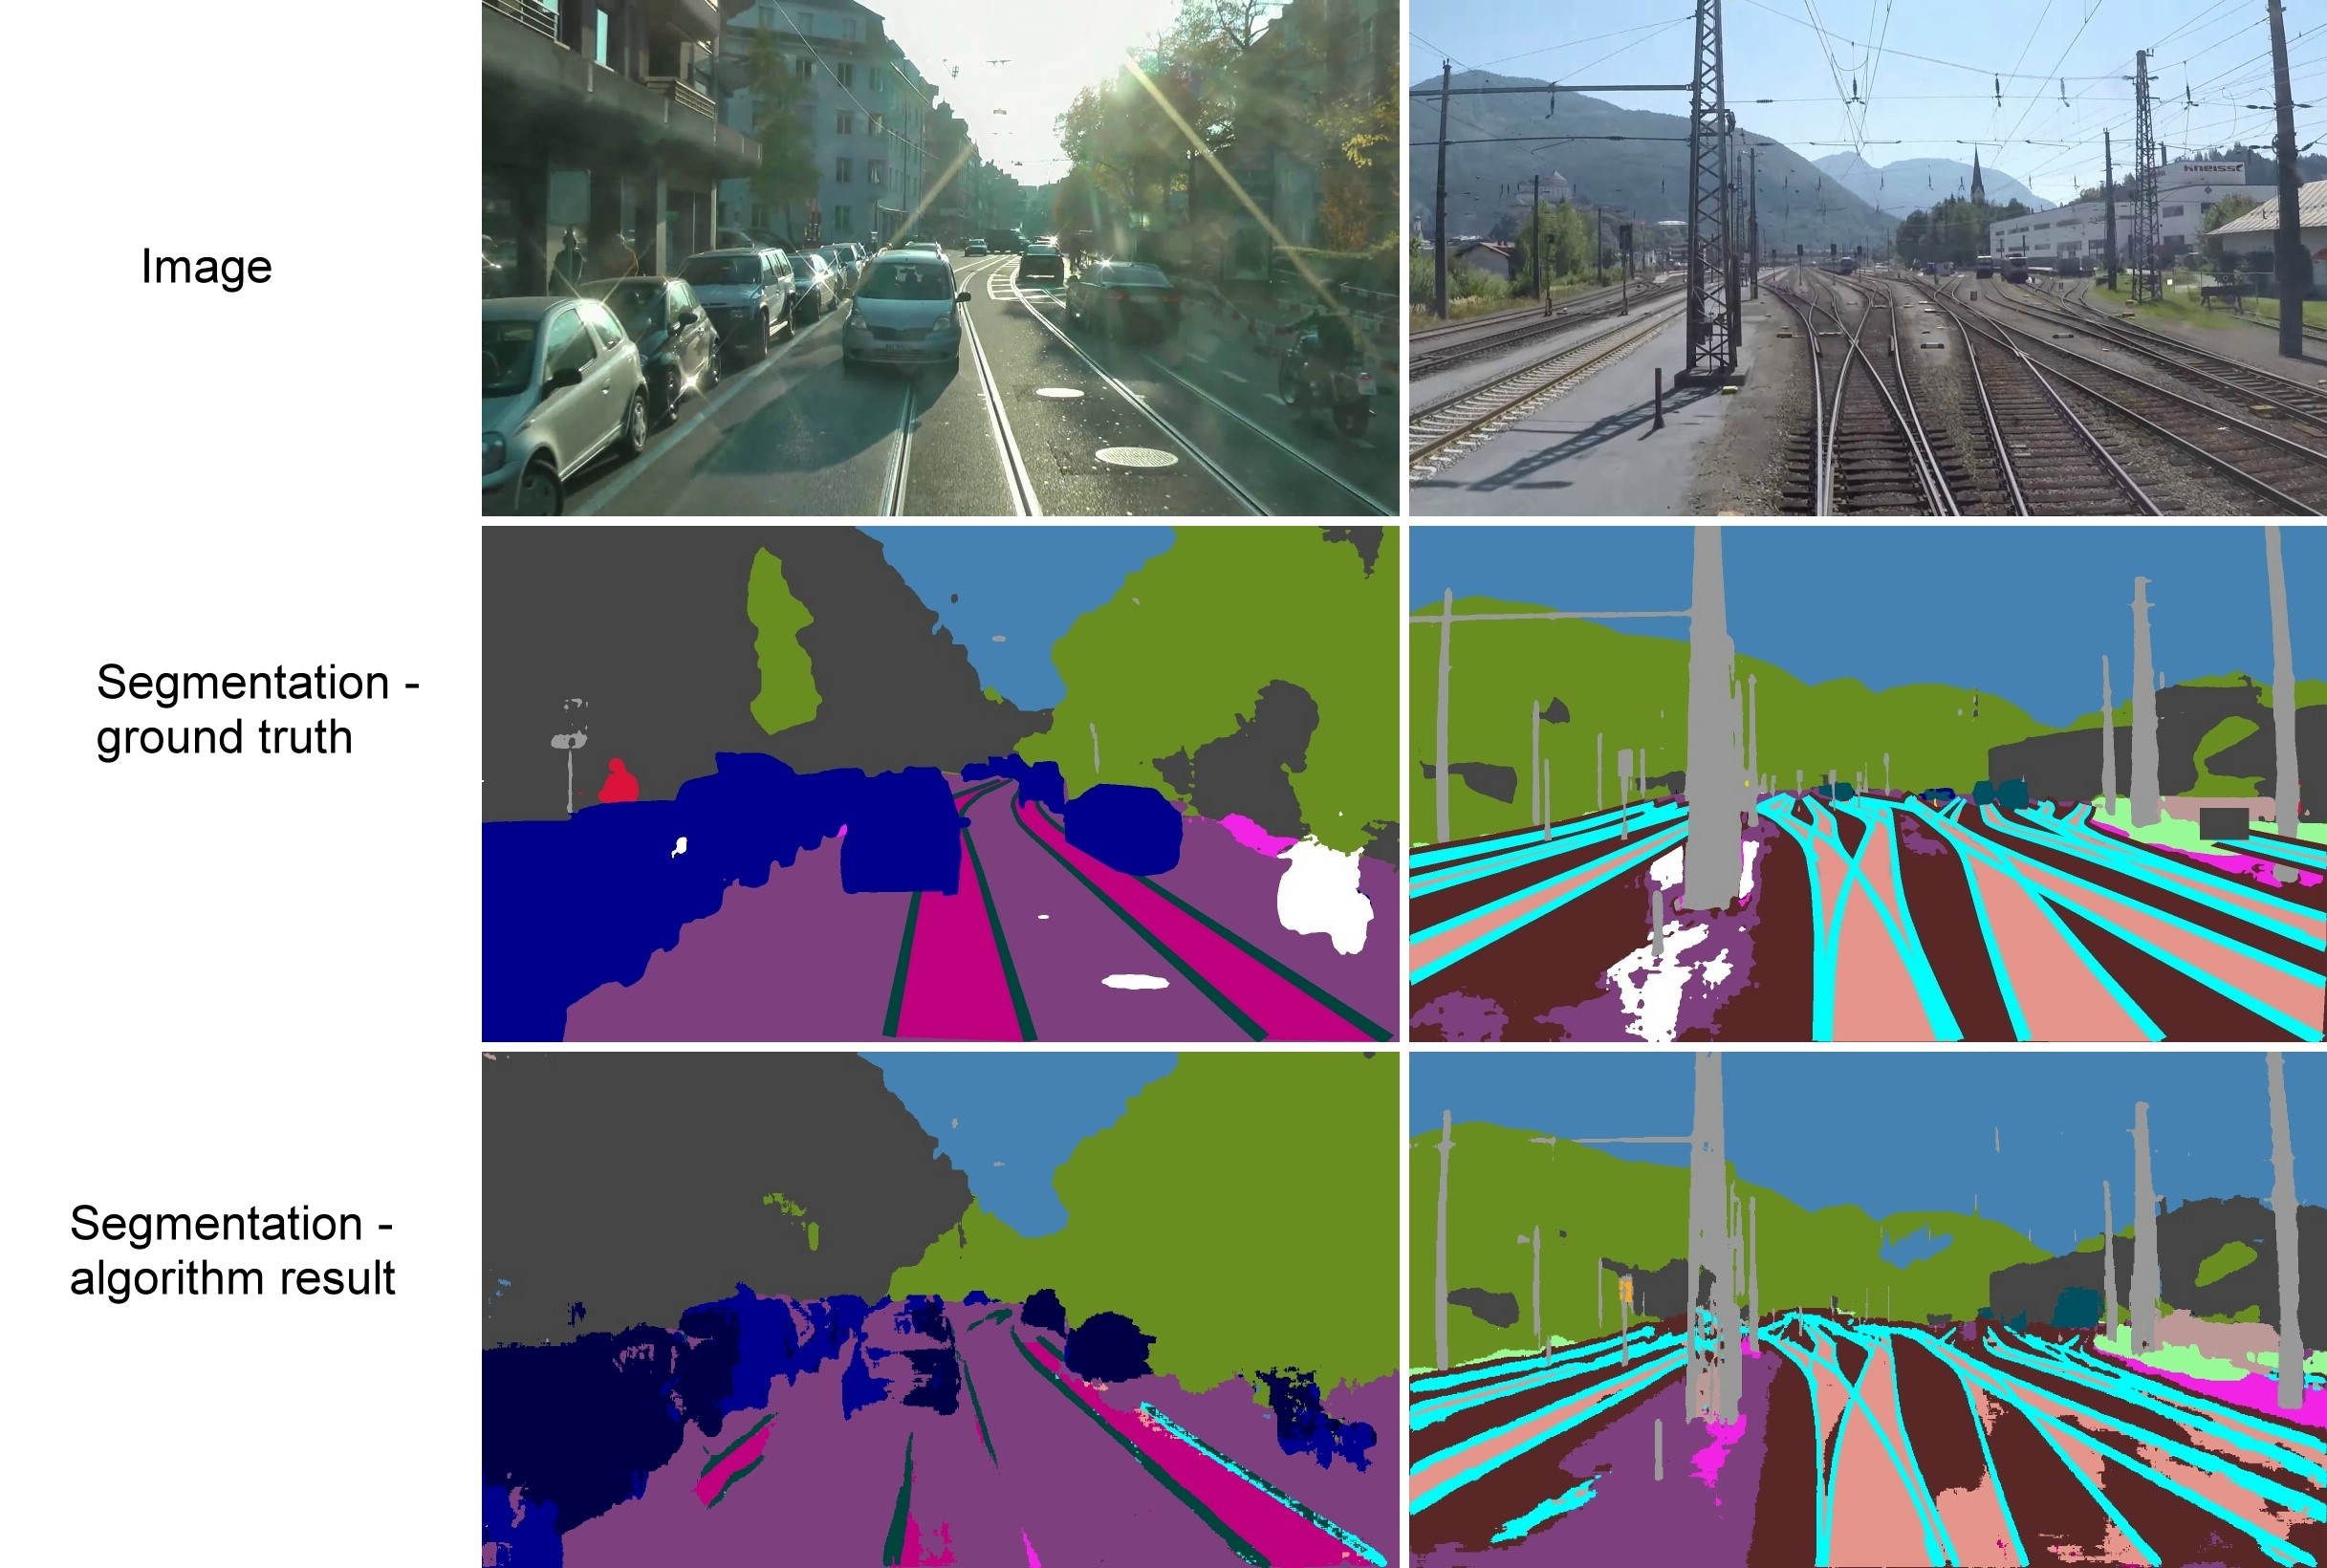 Machine learning approaches are designed to identify dangerous situations. They record and interpret dynamic traffic scenes. Tramway (left), railway(right)